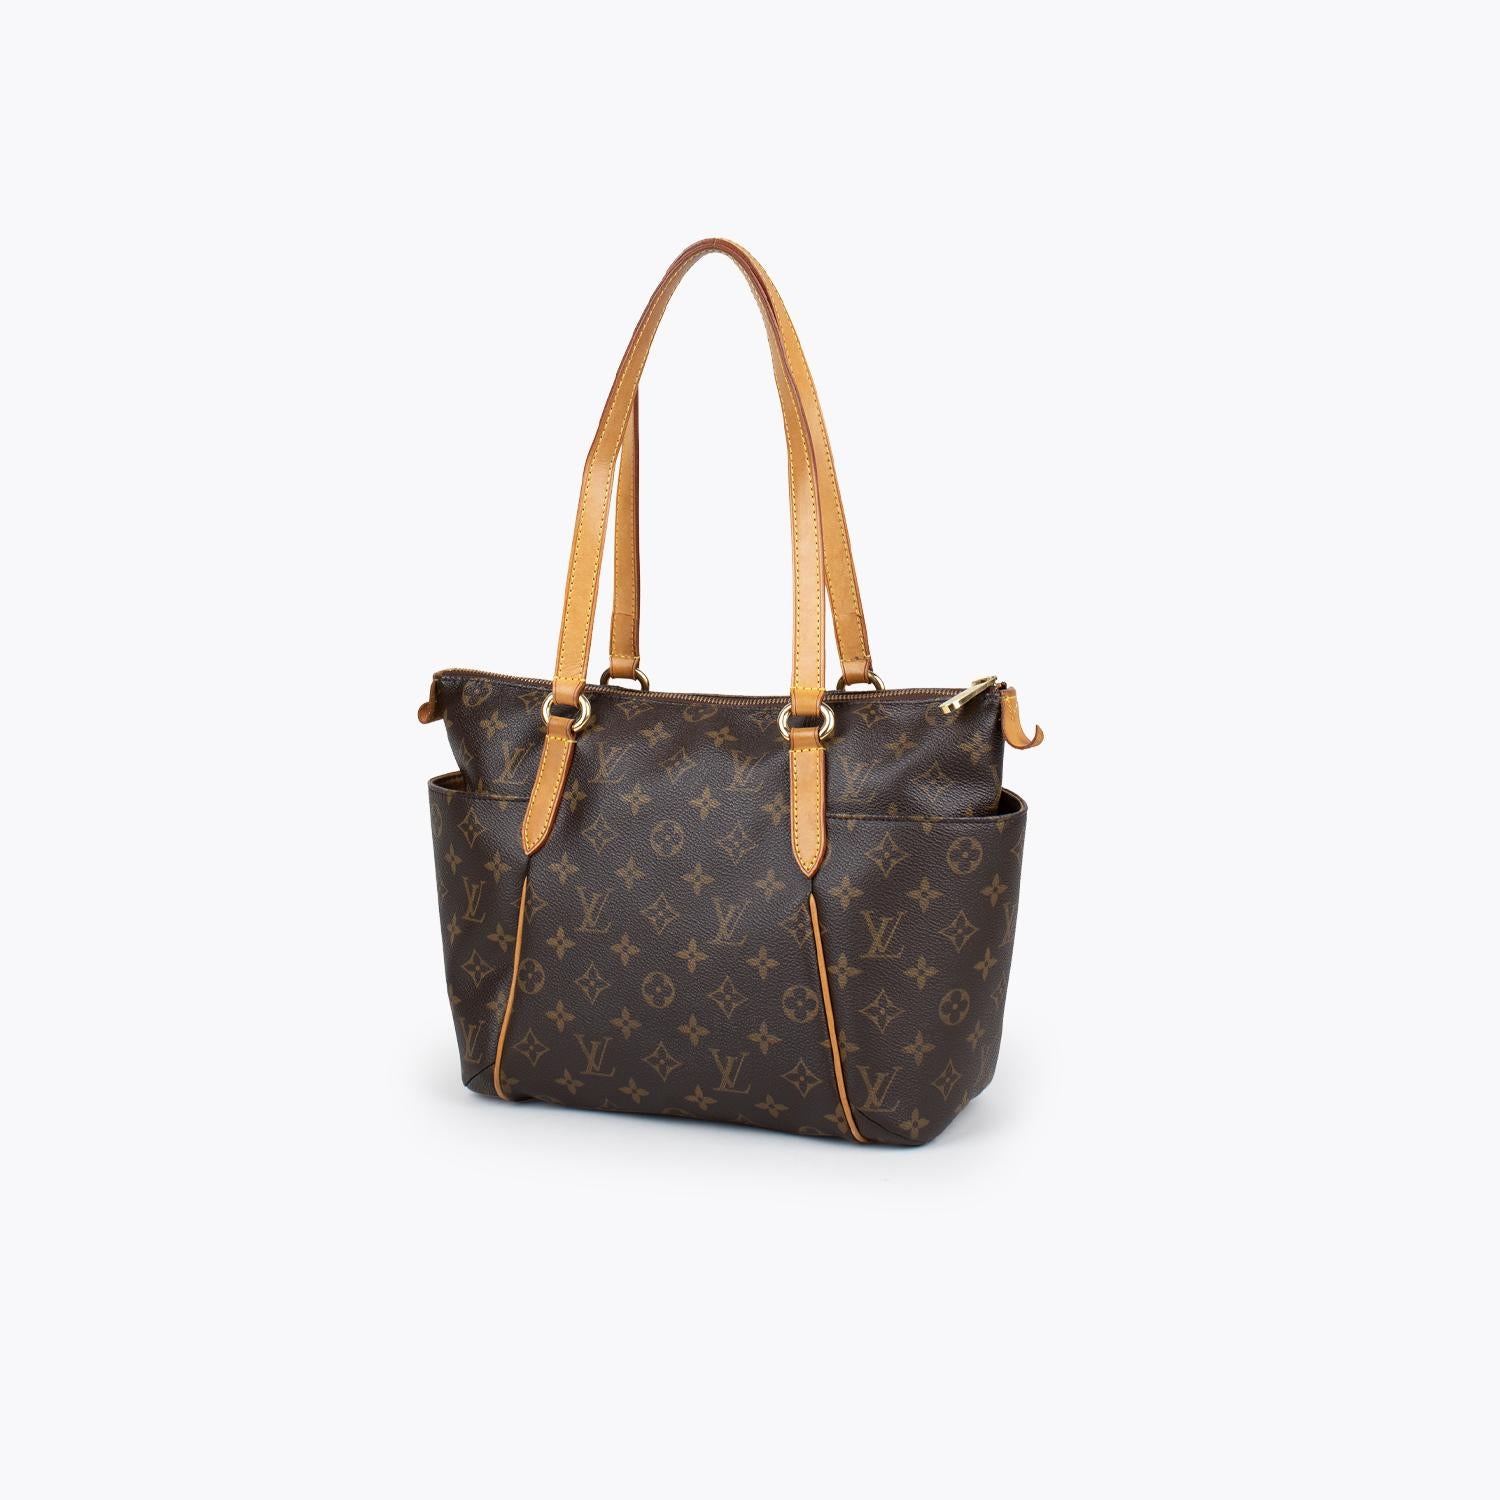 Louis Vuitton Bosphore Messenger PM In Good Condition For Sale In Sundbyberg, SE